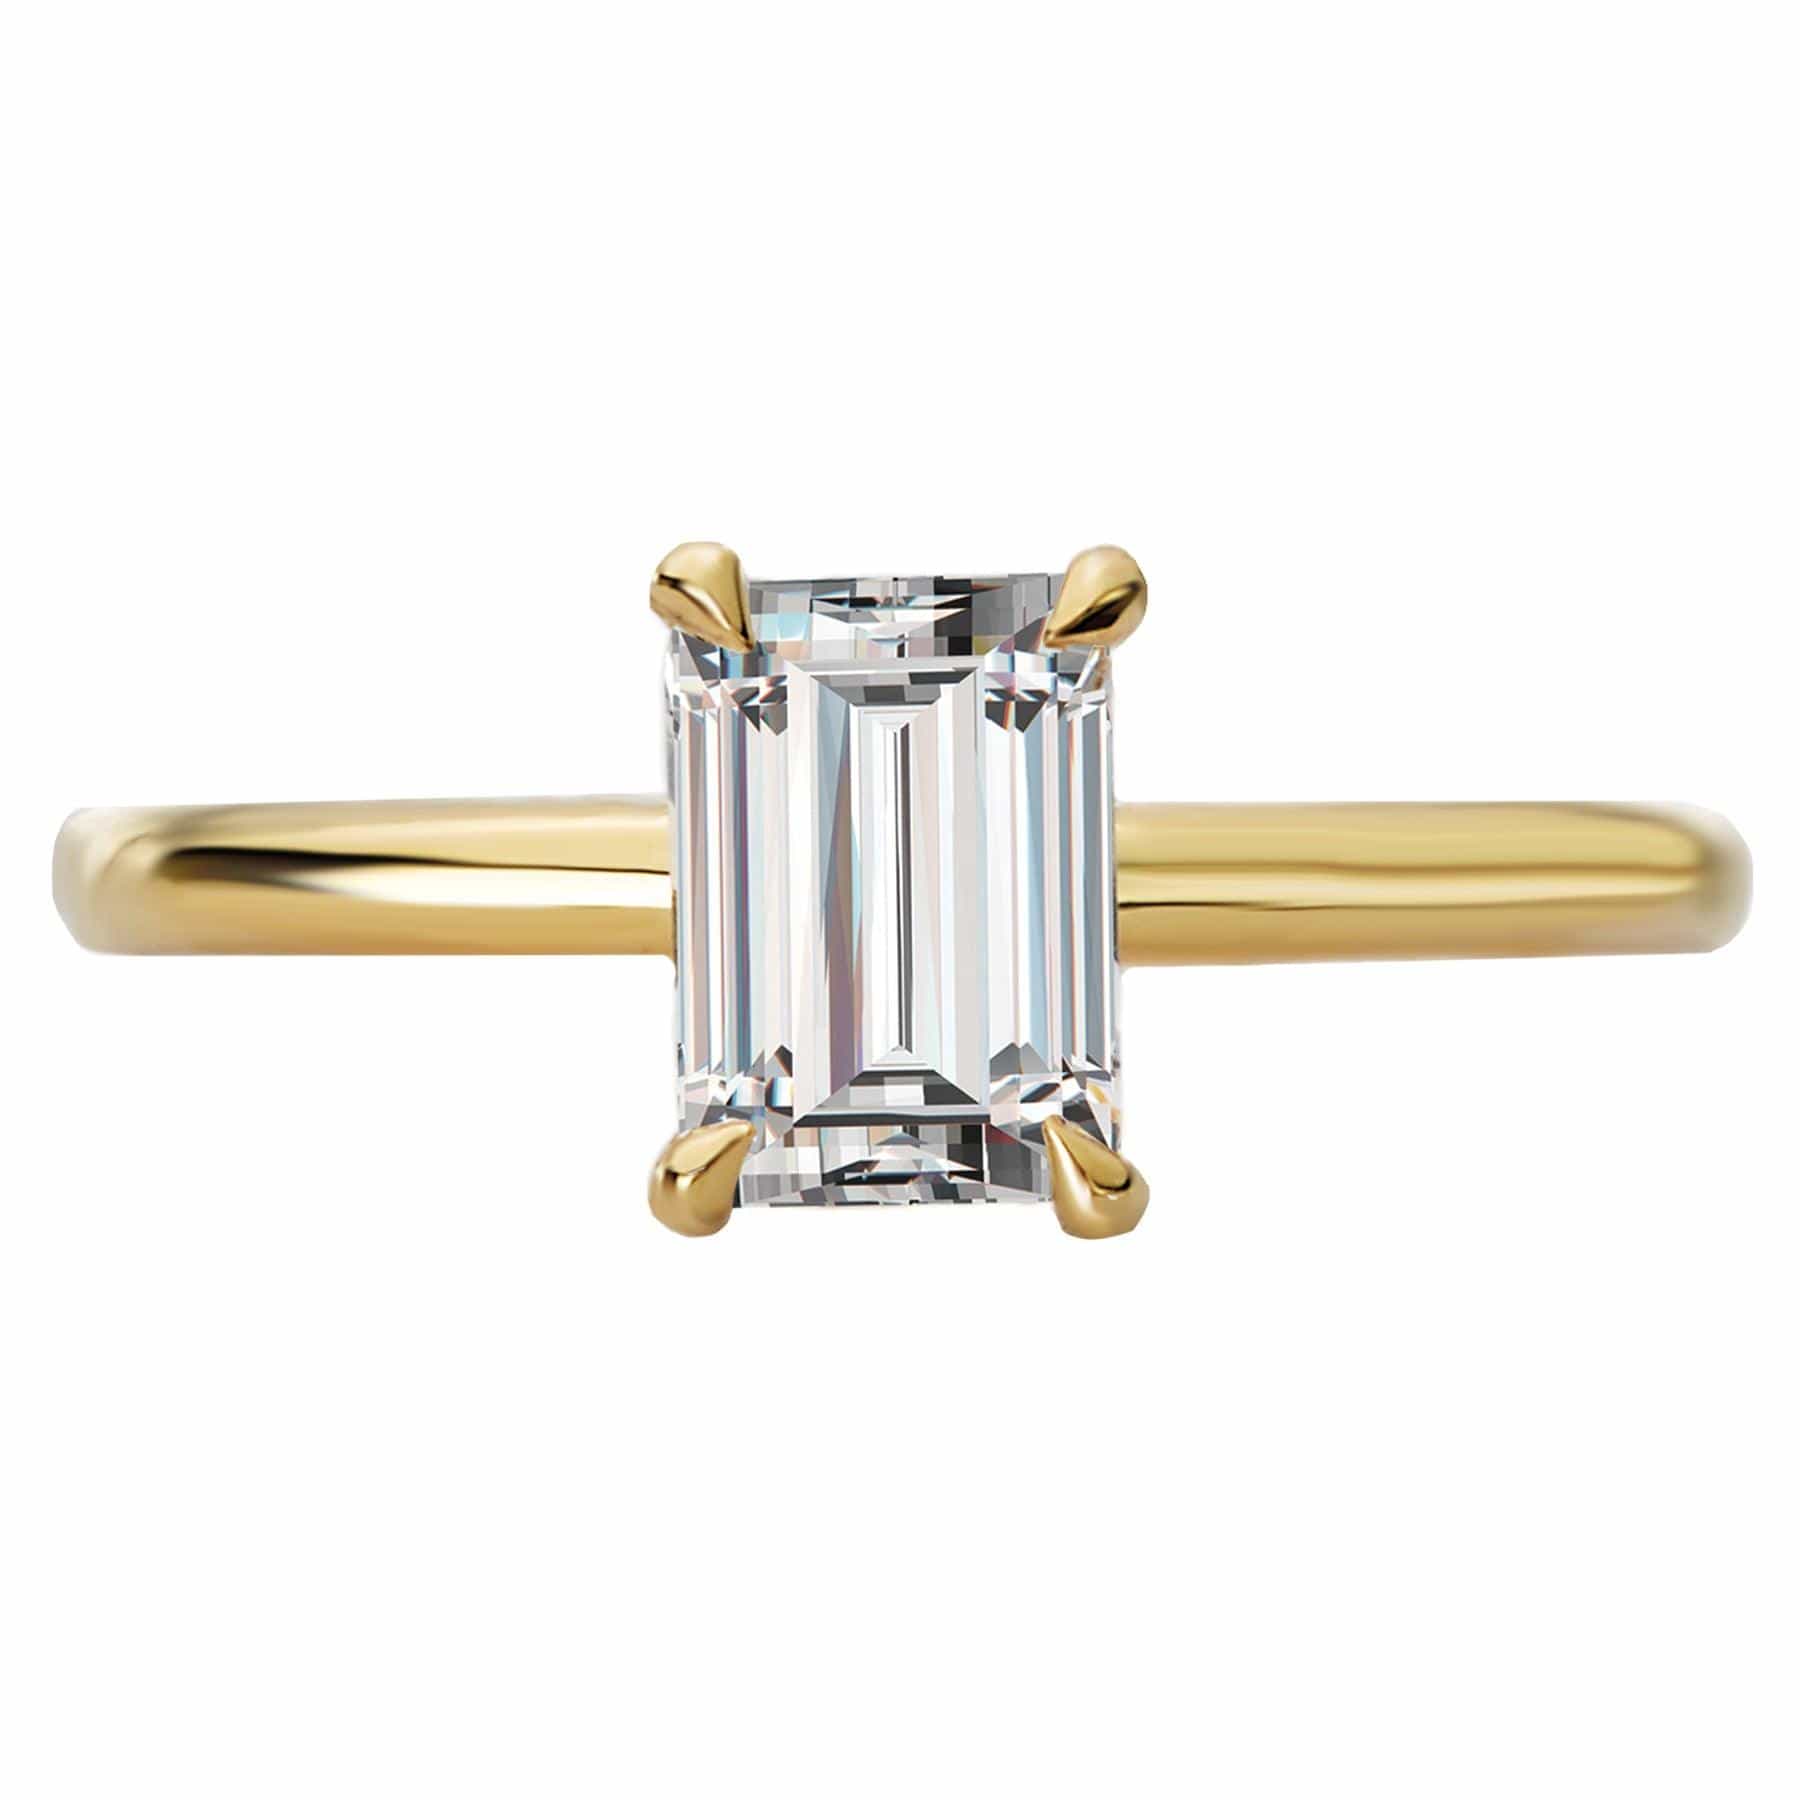 BW JAMES Engagement Rings "The Camilla" Emerald Cut Solitaire Hidden Halo Semi-Mount Diamond Ring